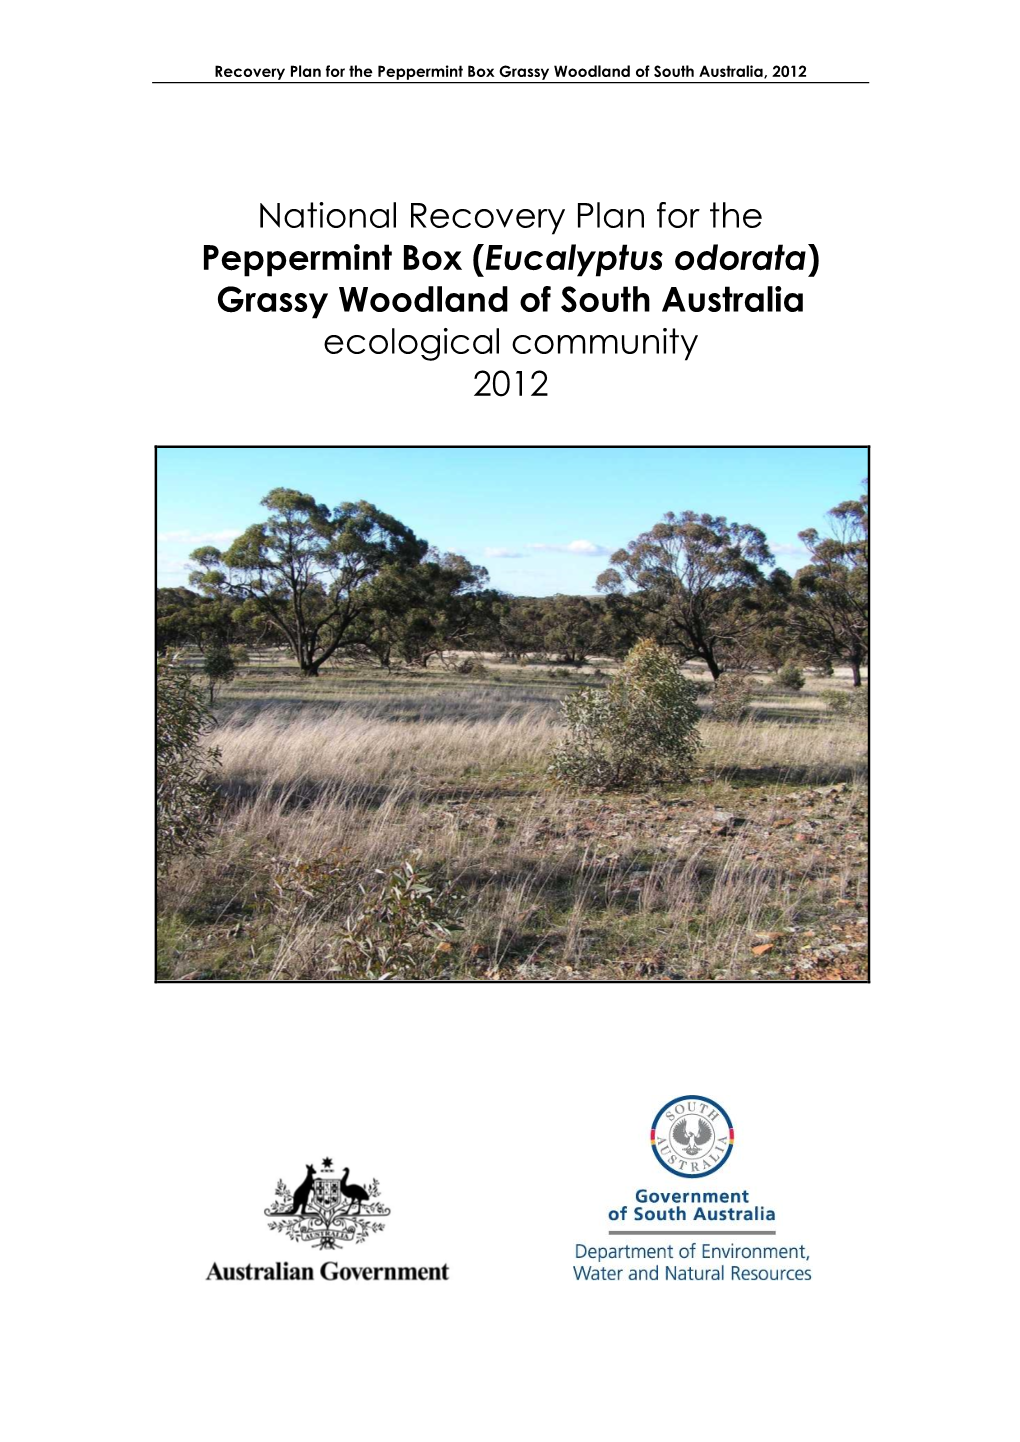 National Recovery Plan for the Peppermint Box (Eucalyptus Odorata) Grassy Woodland of South Australia Ecological Community 2012